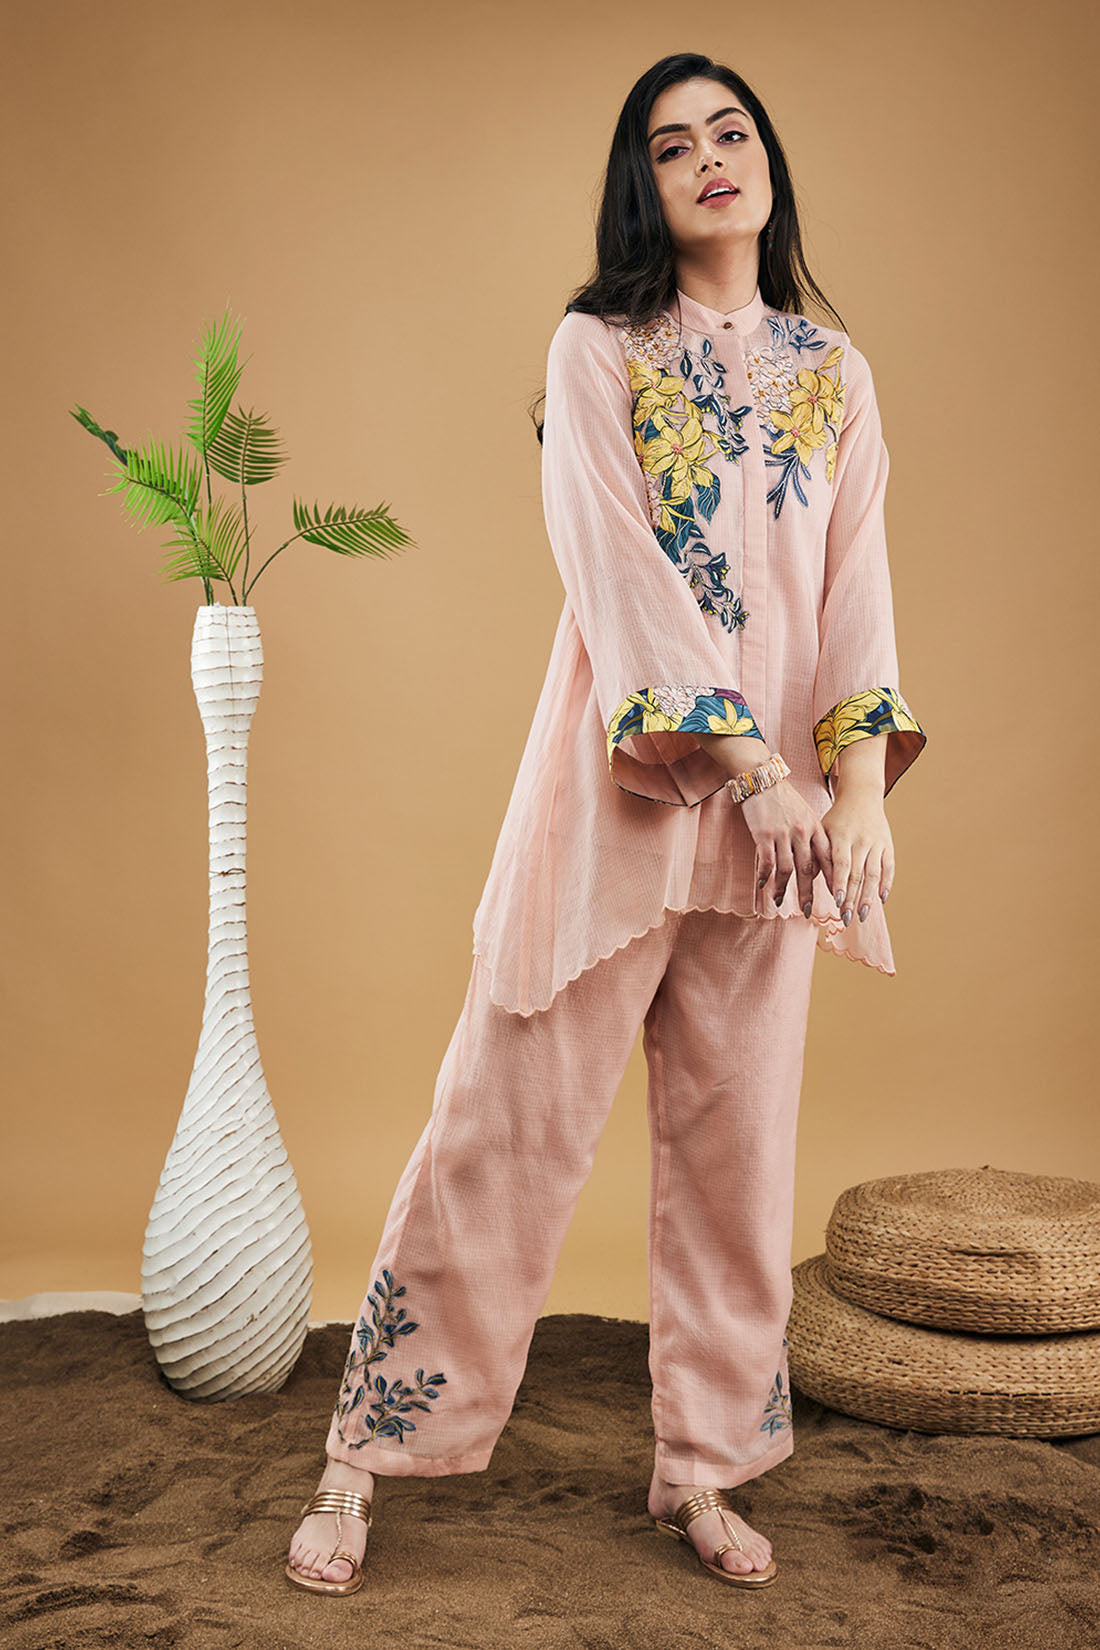 Zinnia Peach Applique High-Low Shirt With Pants